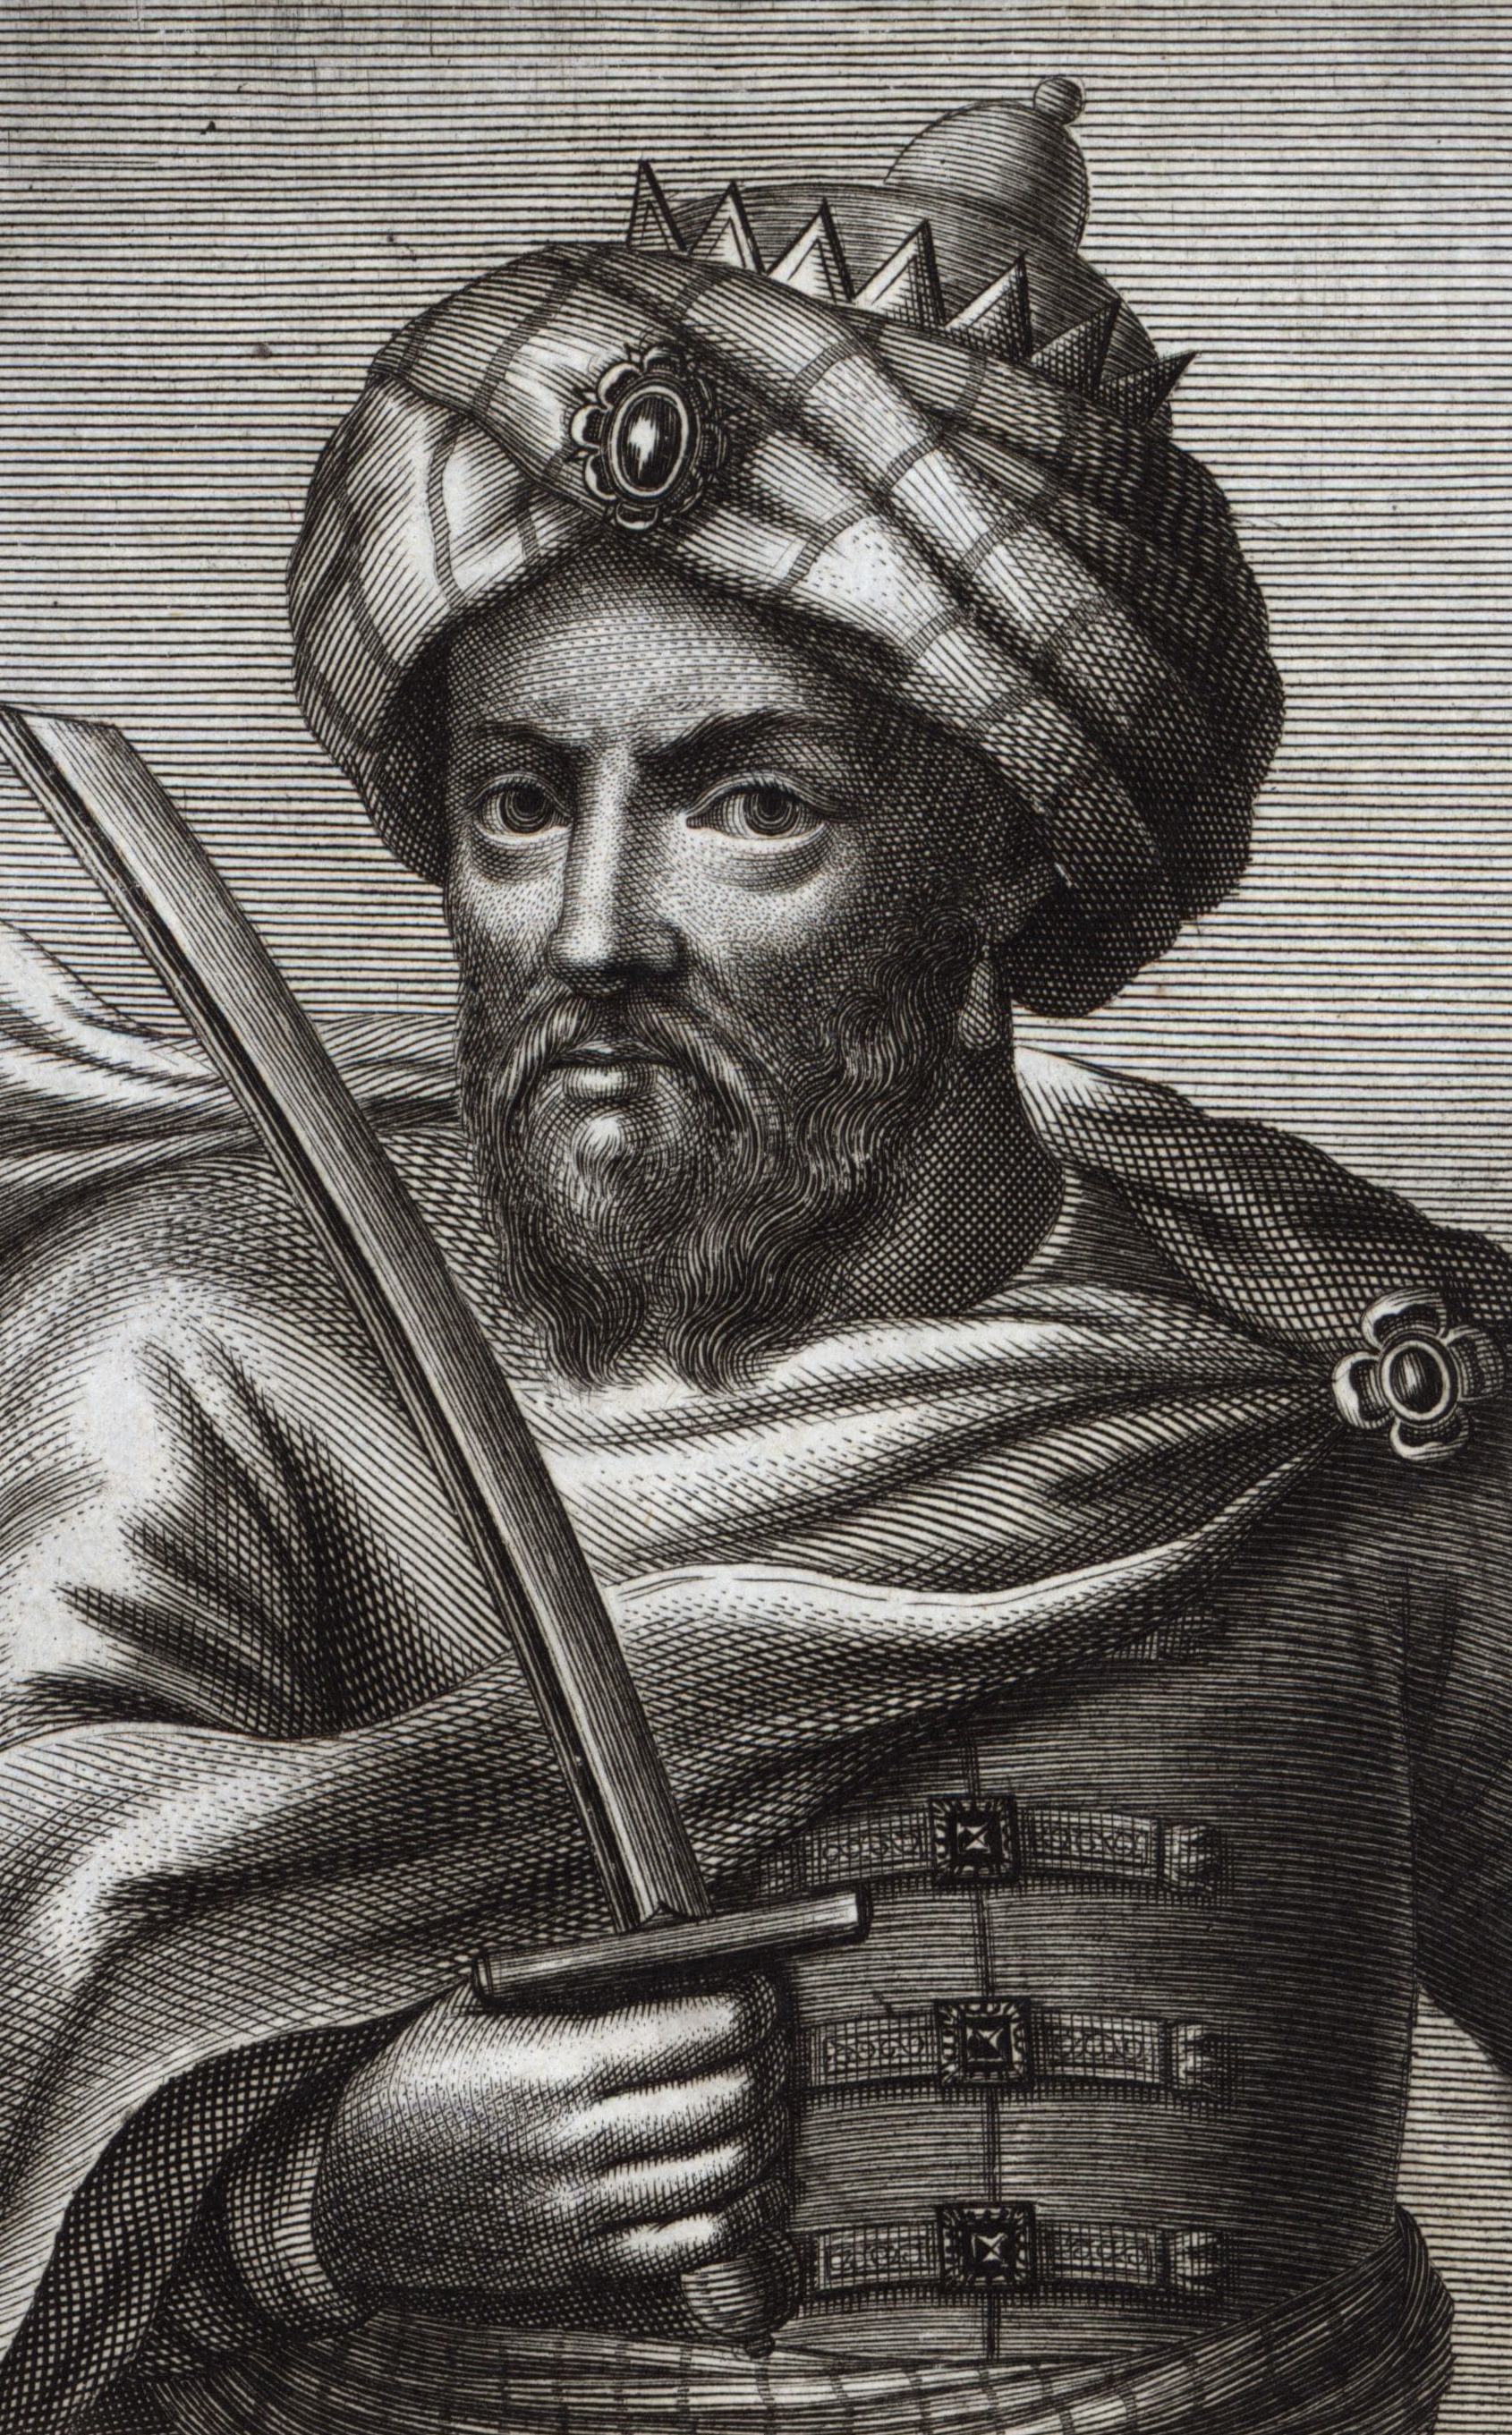 The merchant of venice prince of morocco character analysis